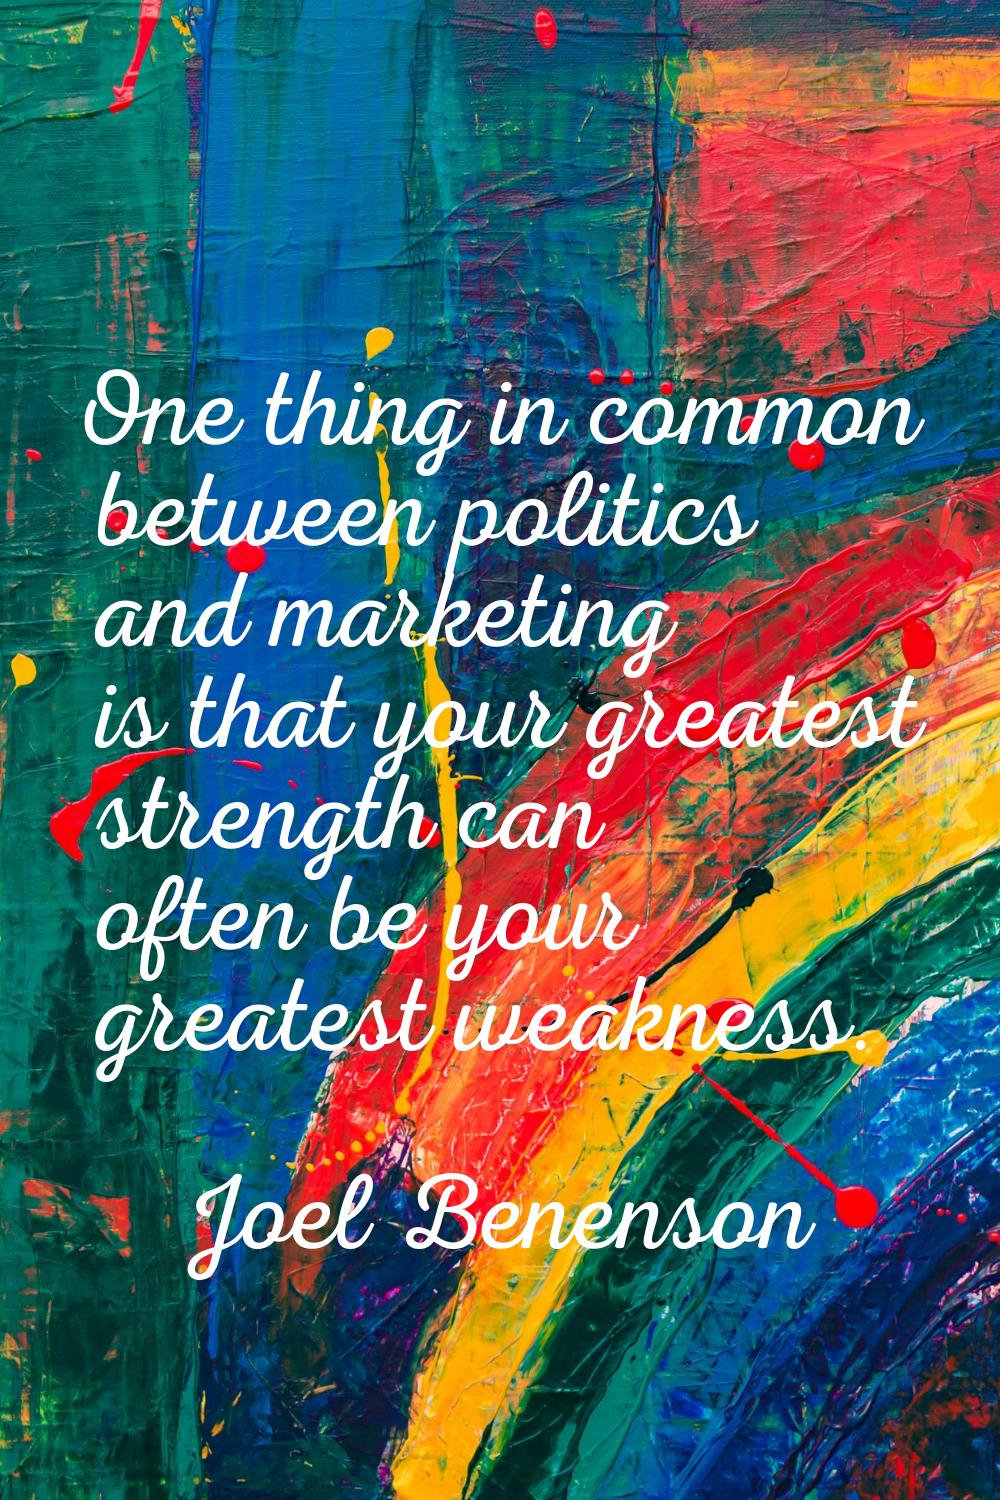 One thing in common between politics and marketing is that your greatest strength can often be your